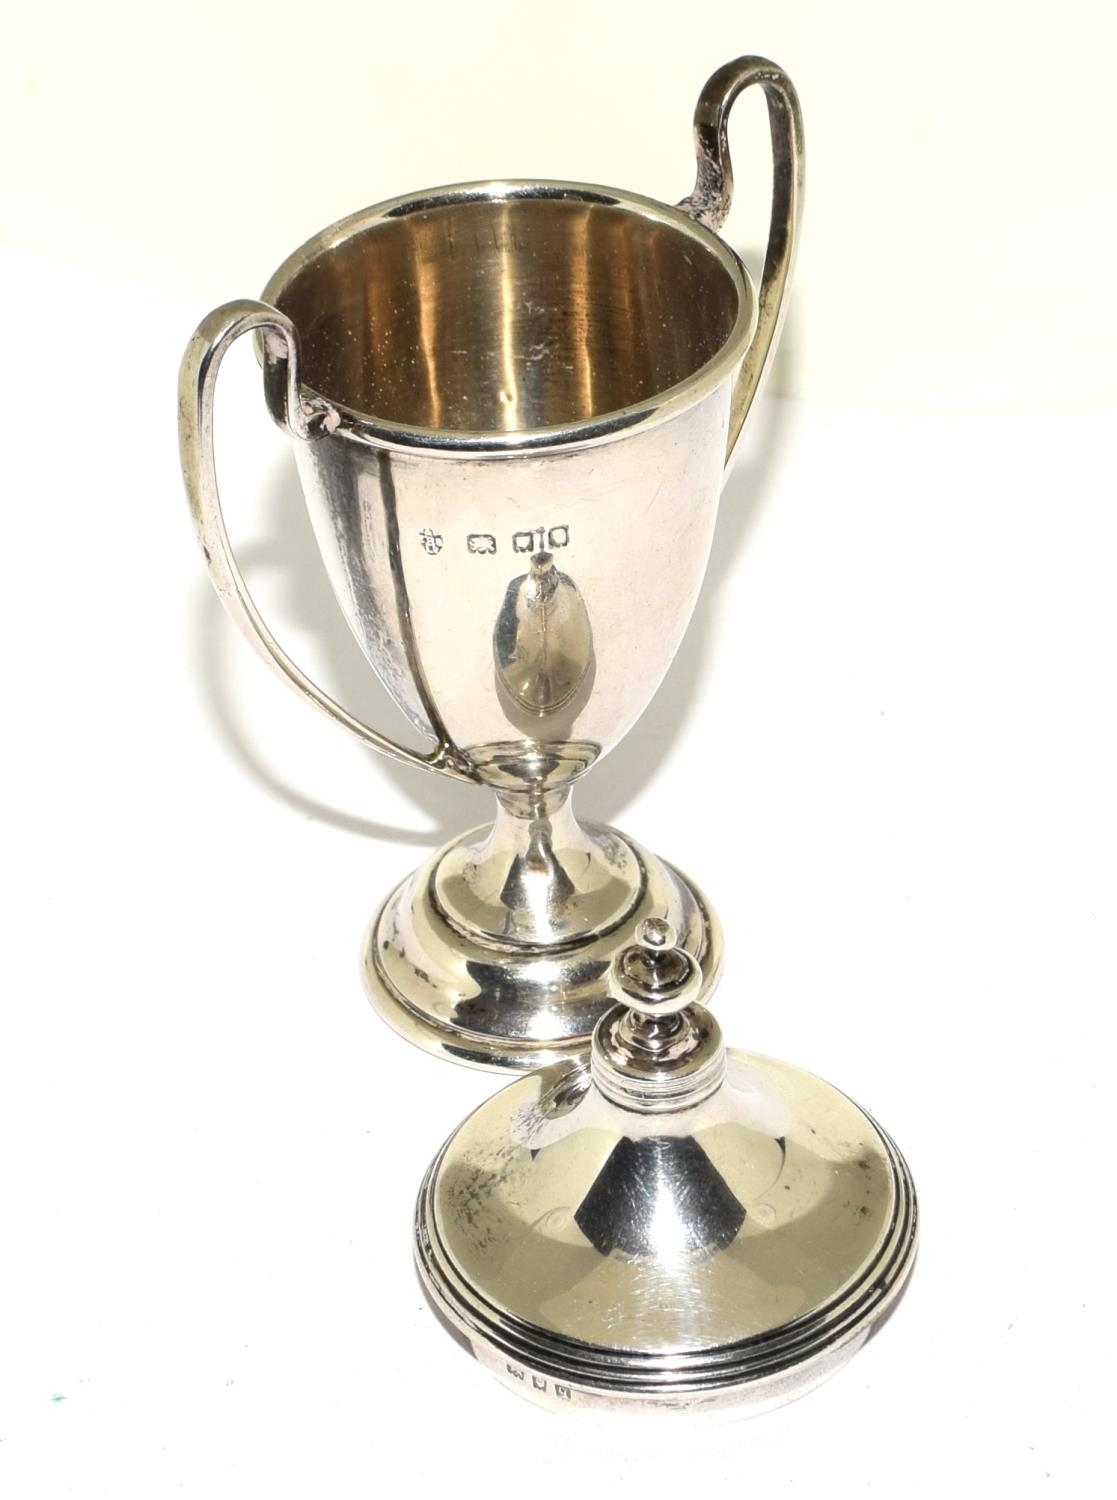 2 x 925 silver trophies 180g - Image 6 of 7